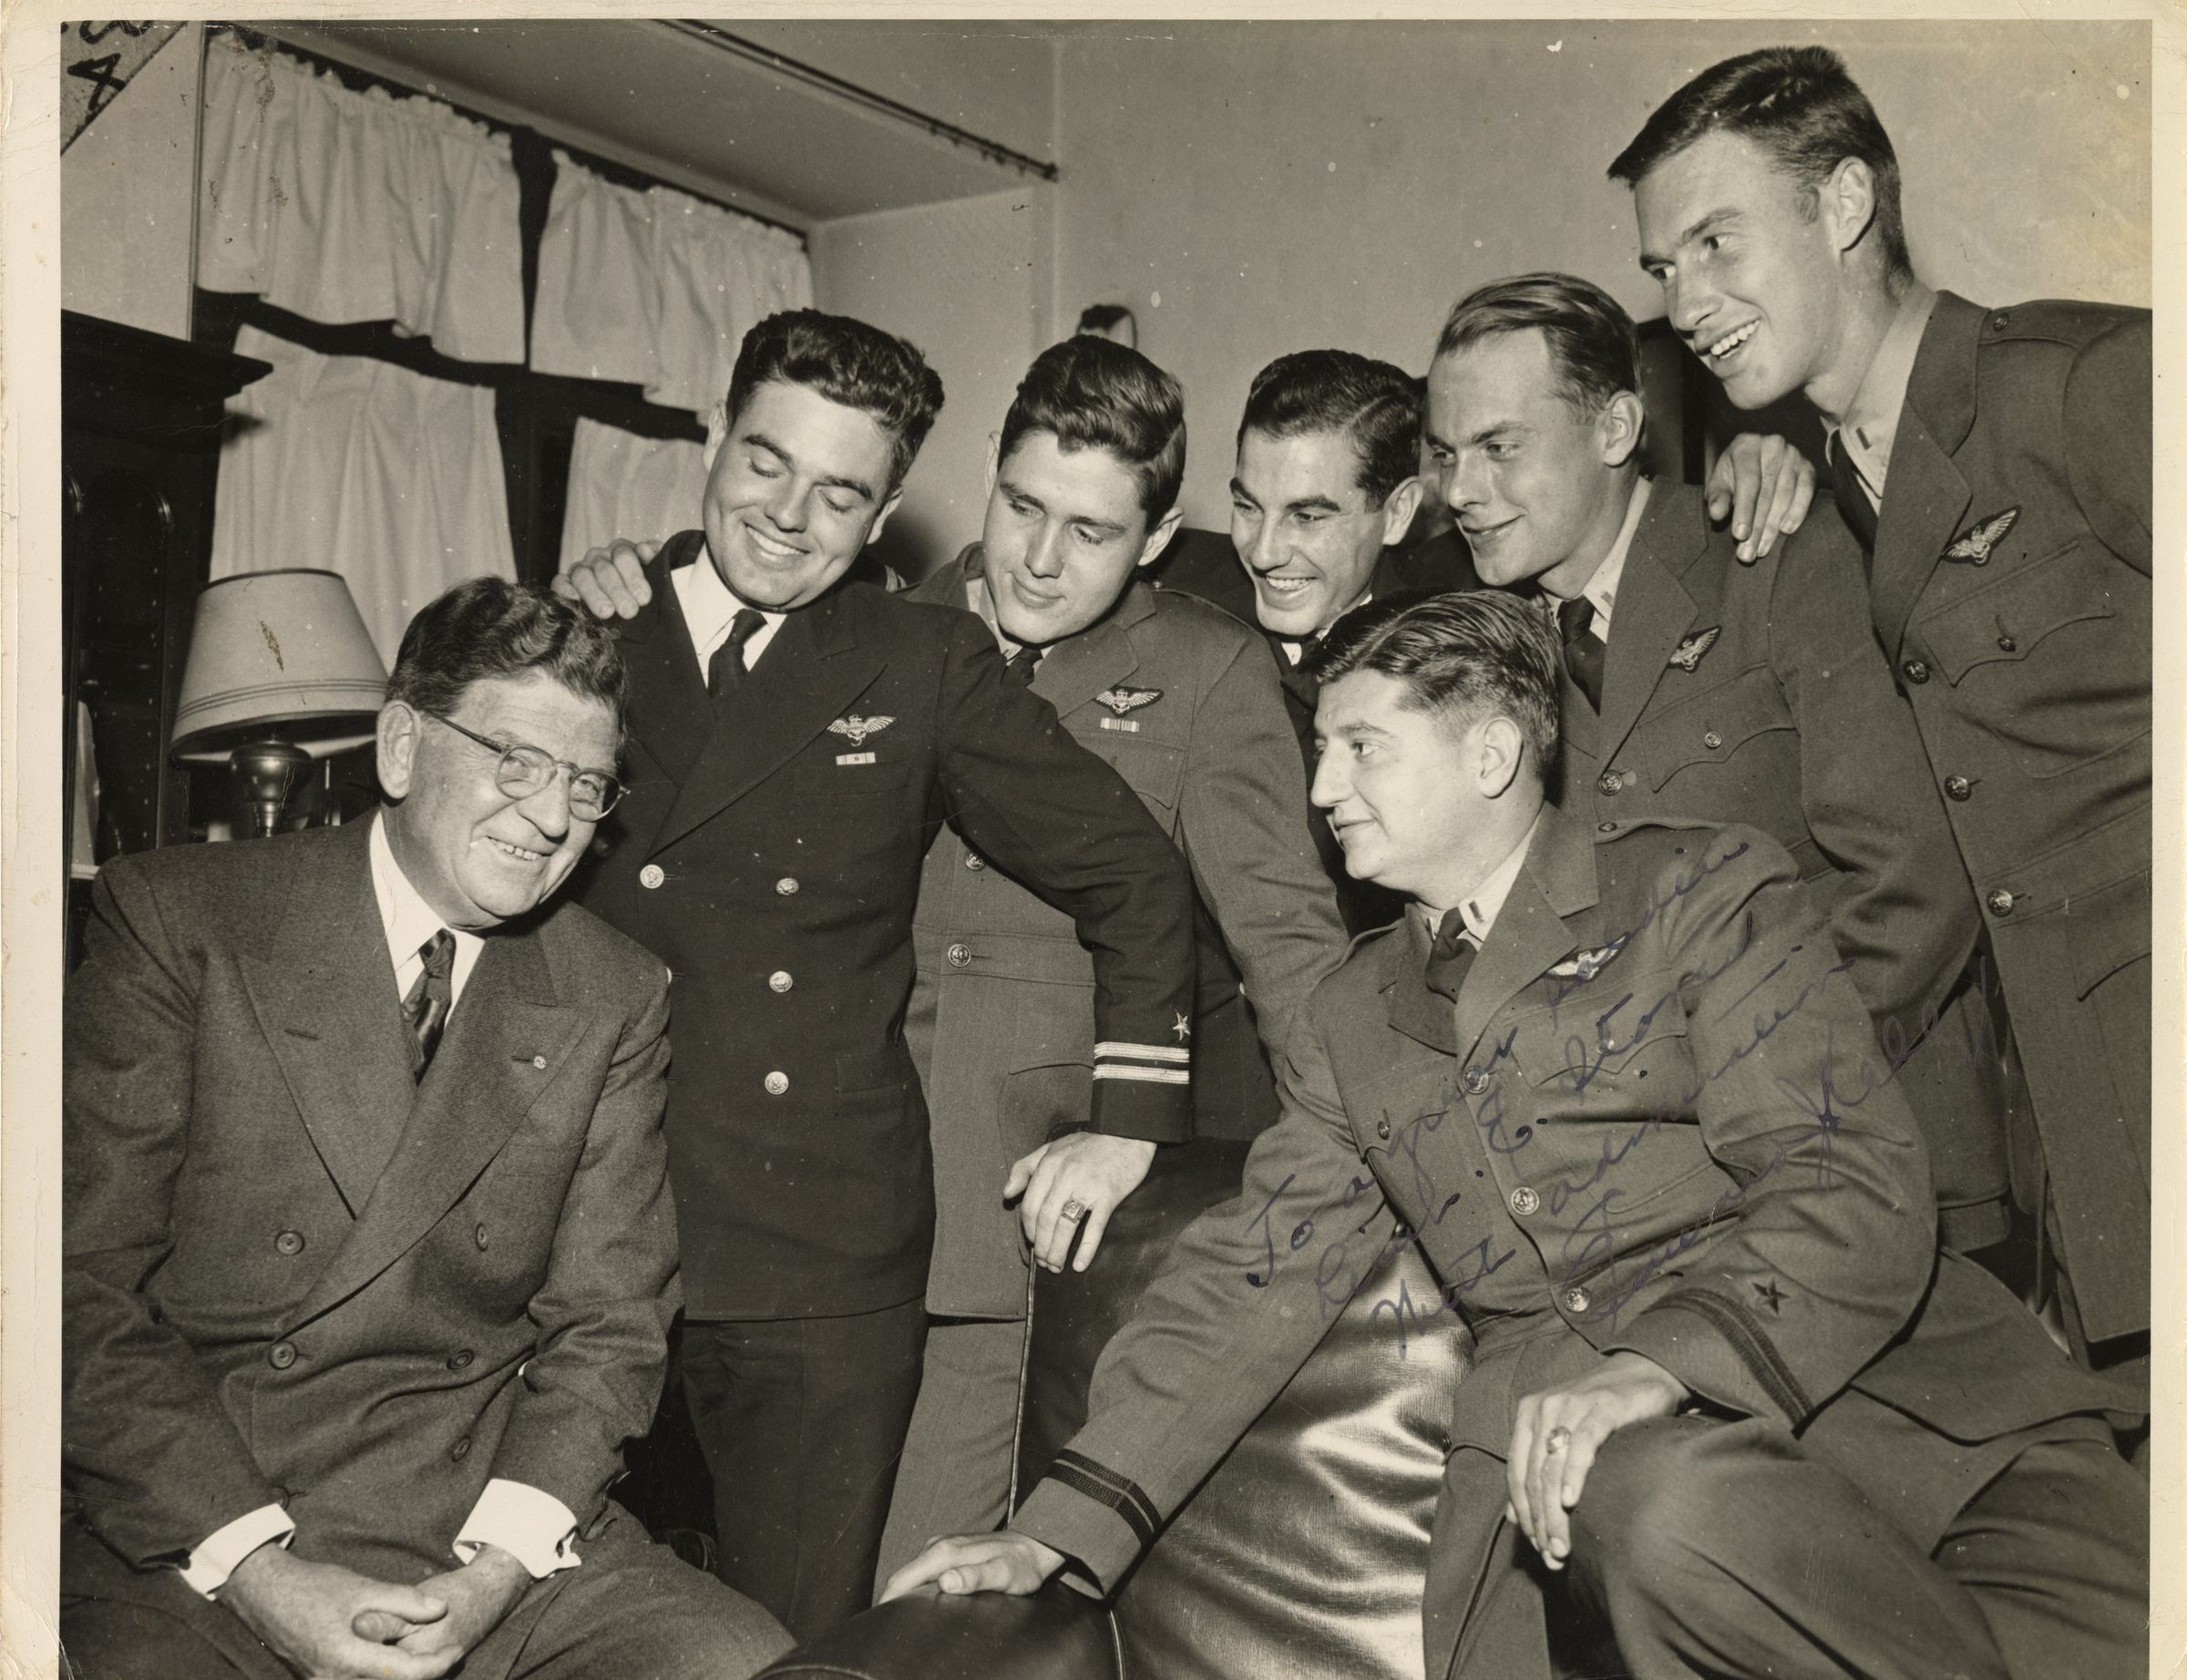 Primary Image of Mayor Edward Kelly Meets the Members of Fighting Squadron Five (VF-5)